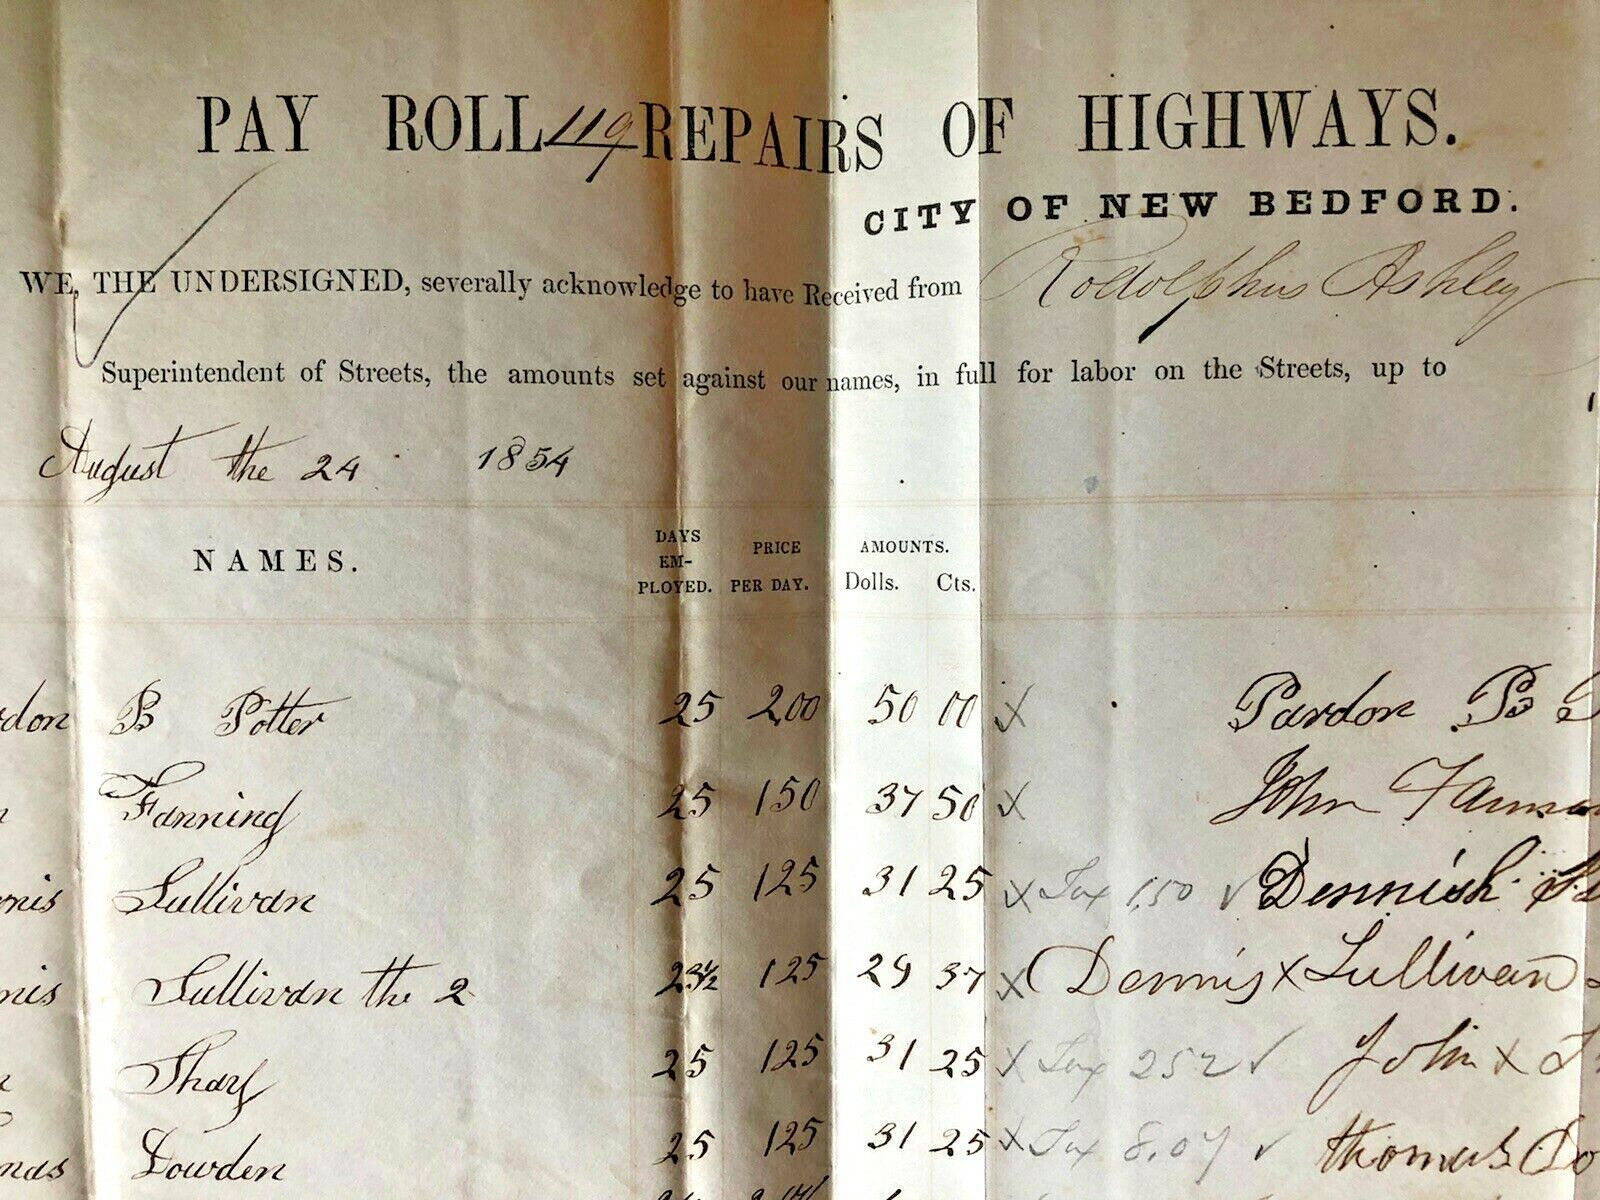 NEW BEDFORD MA 1854 HIGHWAY REPAIR Pay Roll Broadside signed Rodolphus R Ashley